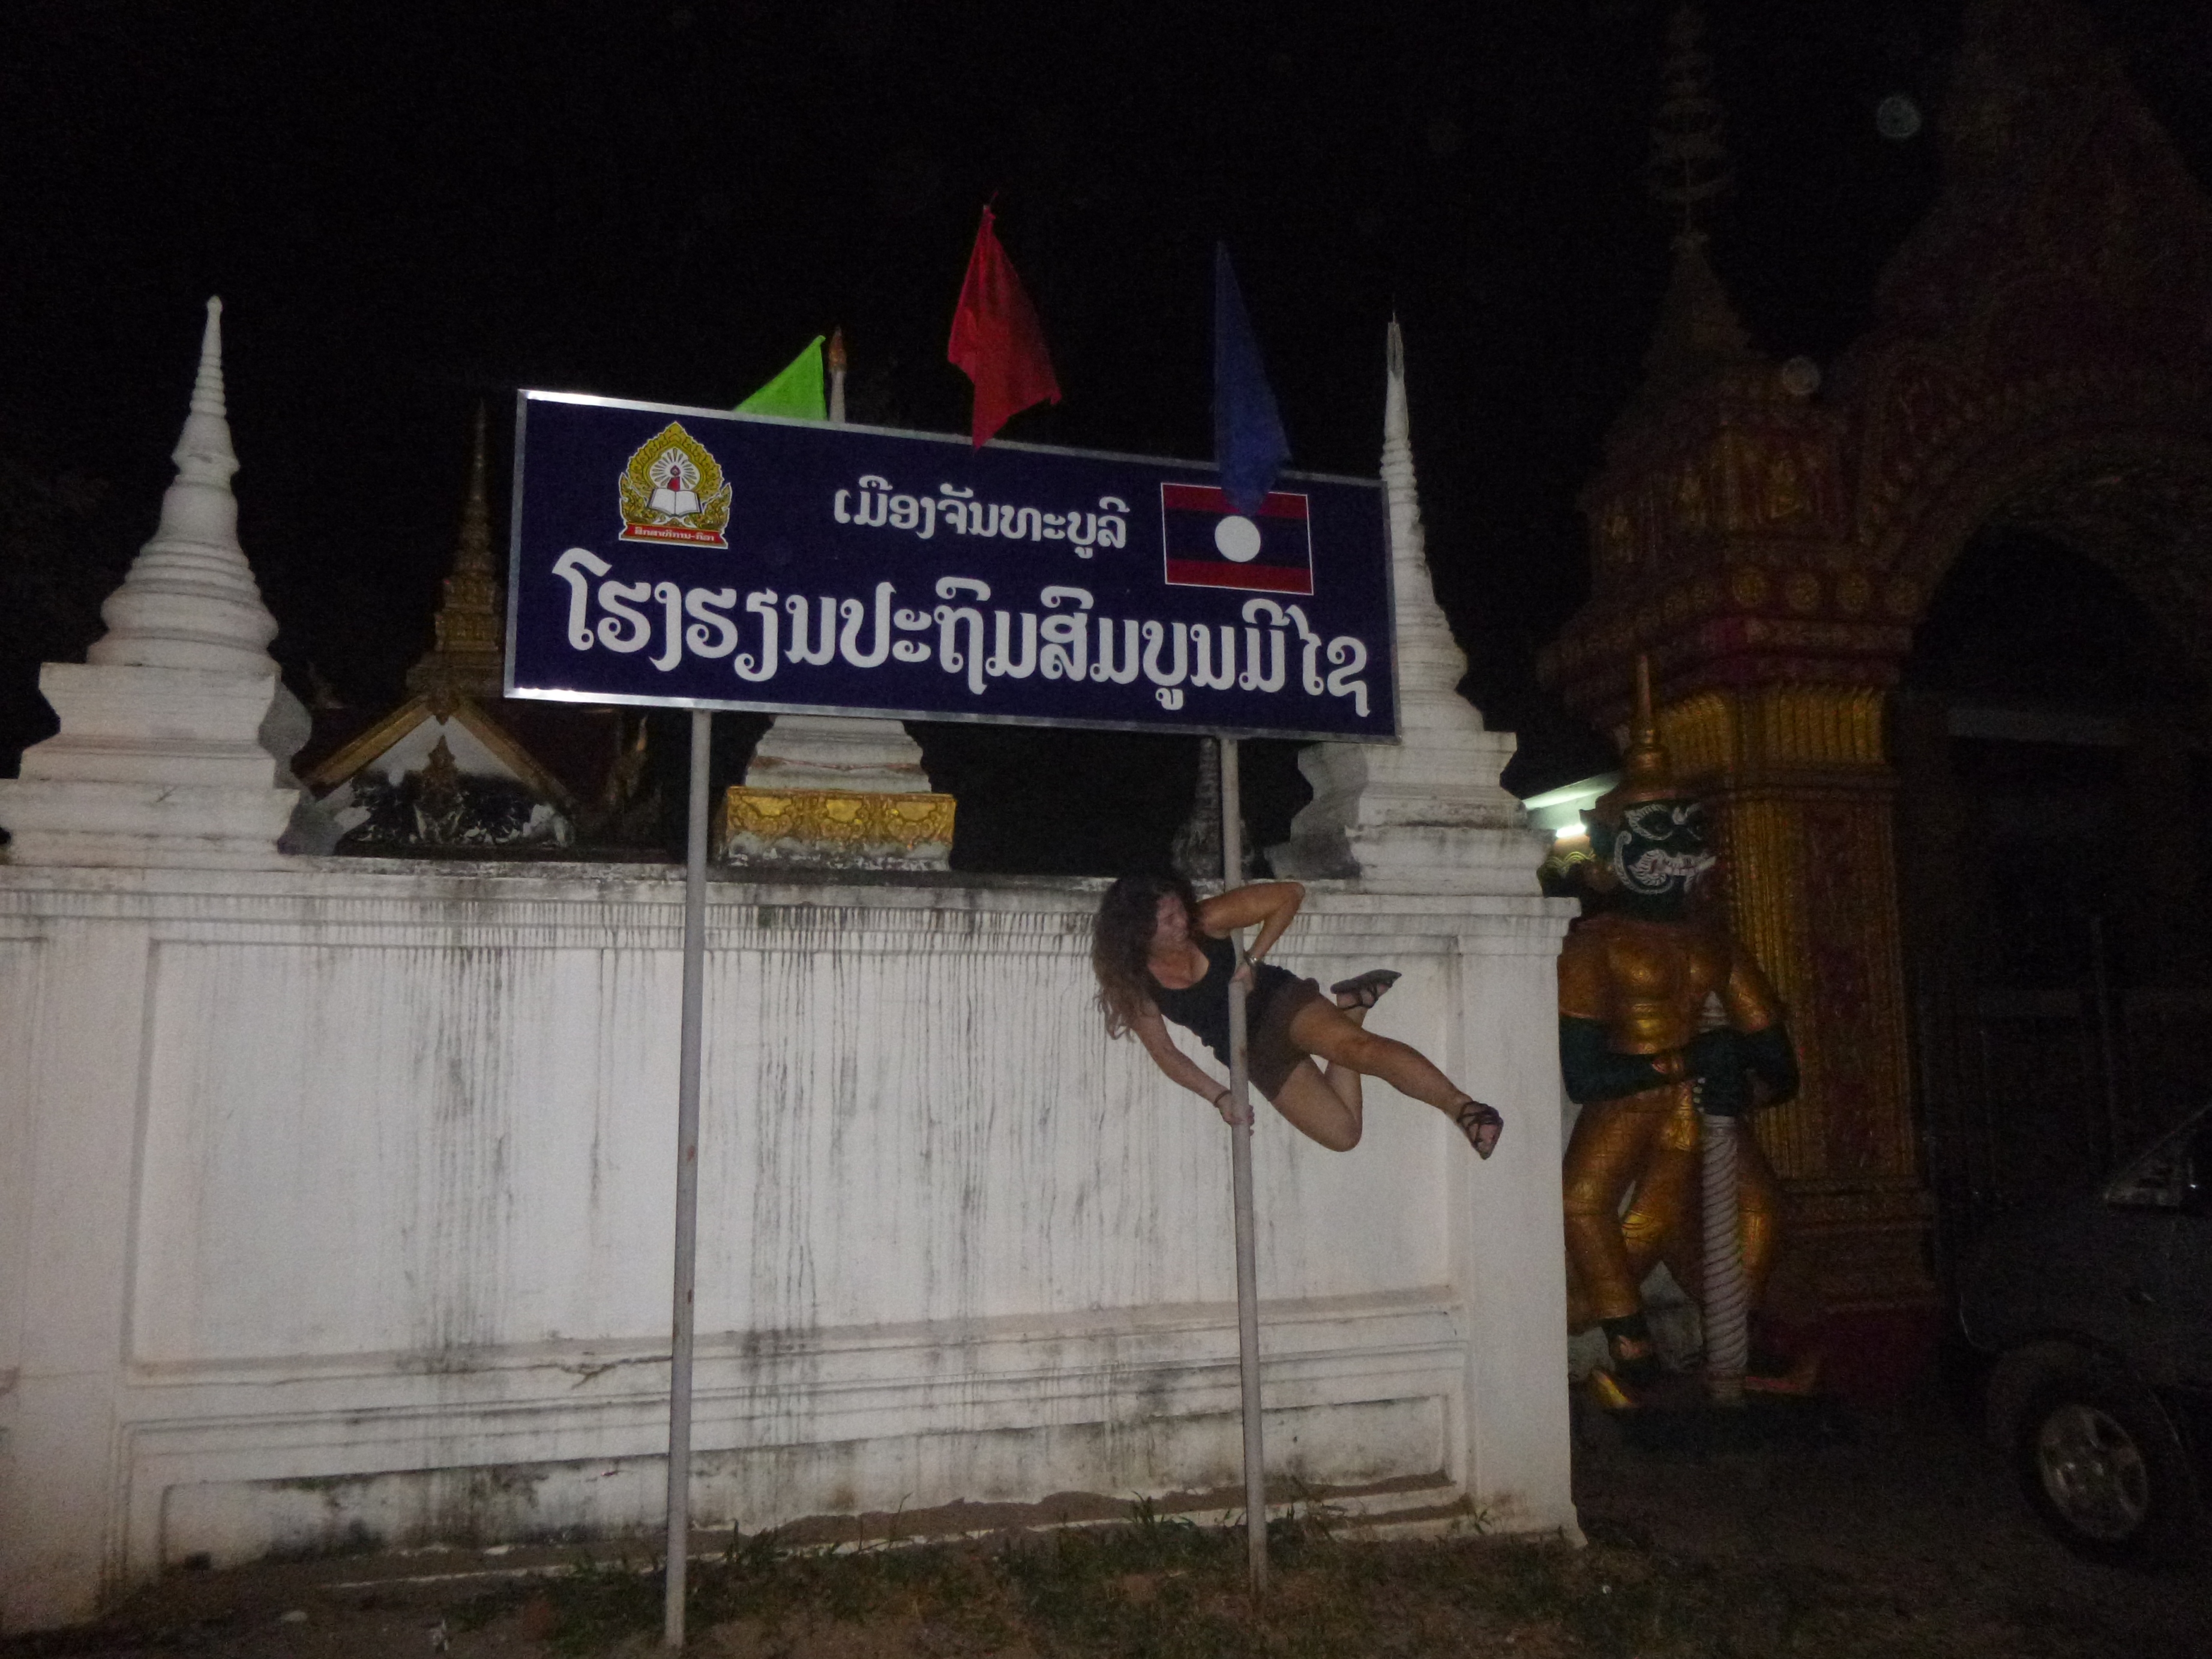 Poling in Thailand and Laos